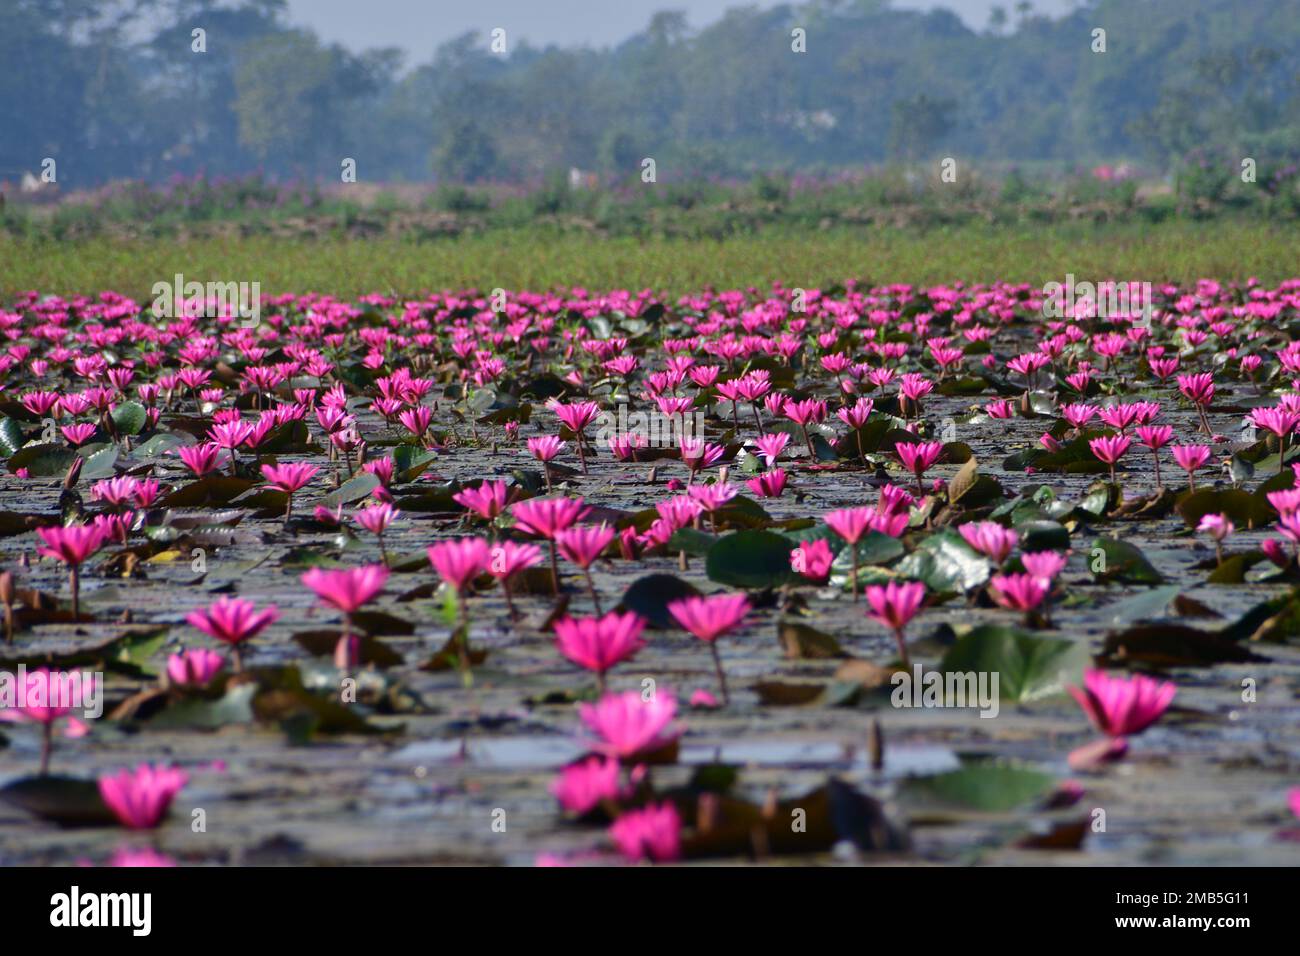 Pink Lily/Lotus blooms in numerous number in Dibir Hawor Bangladesh near Indian Border Stock Photo